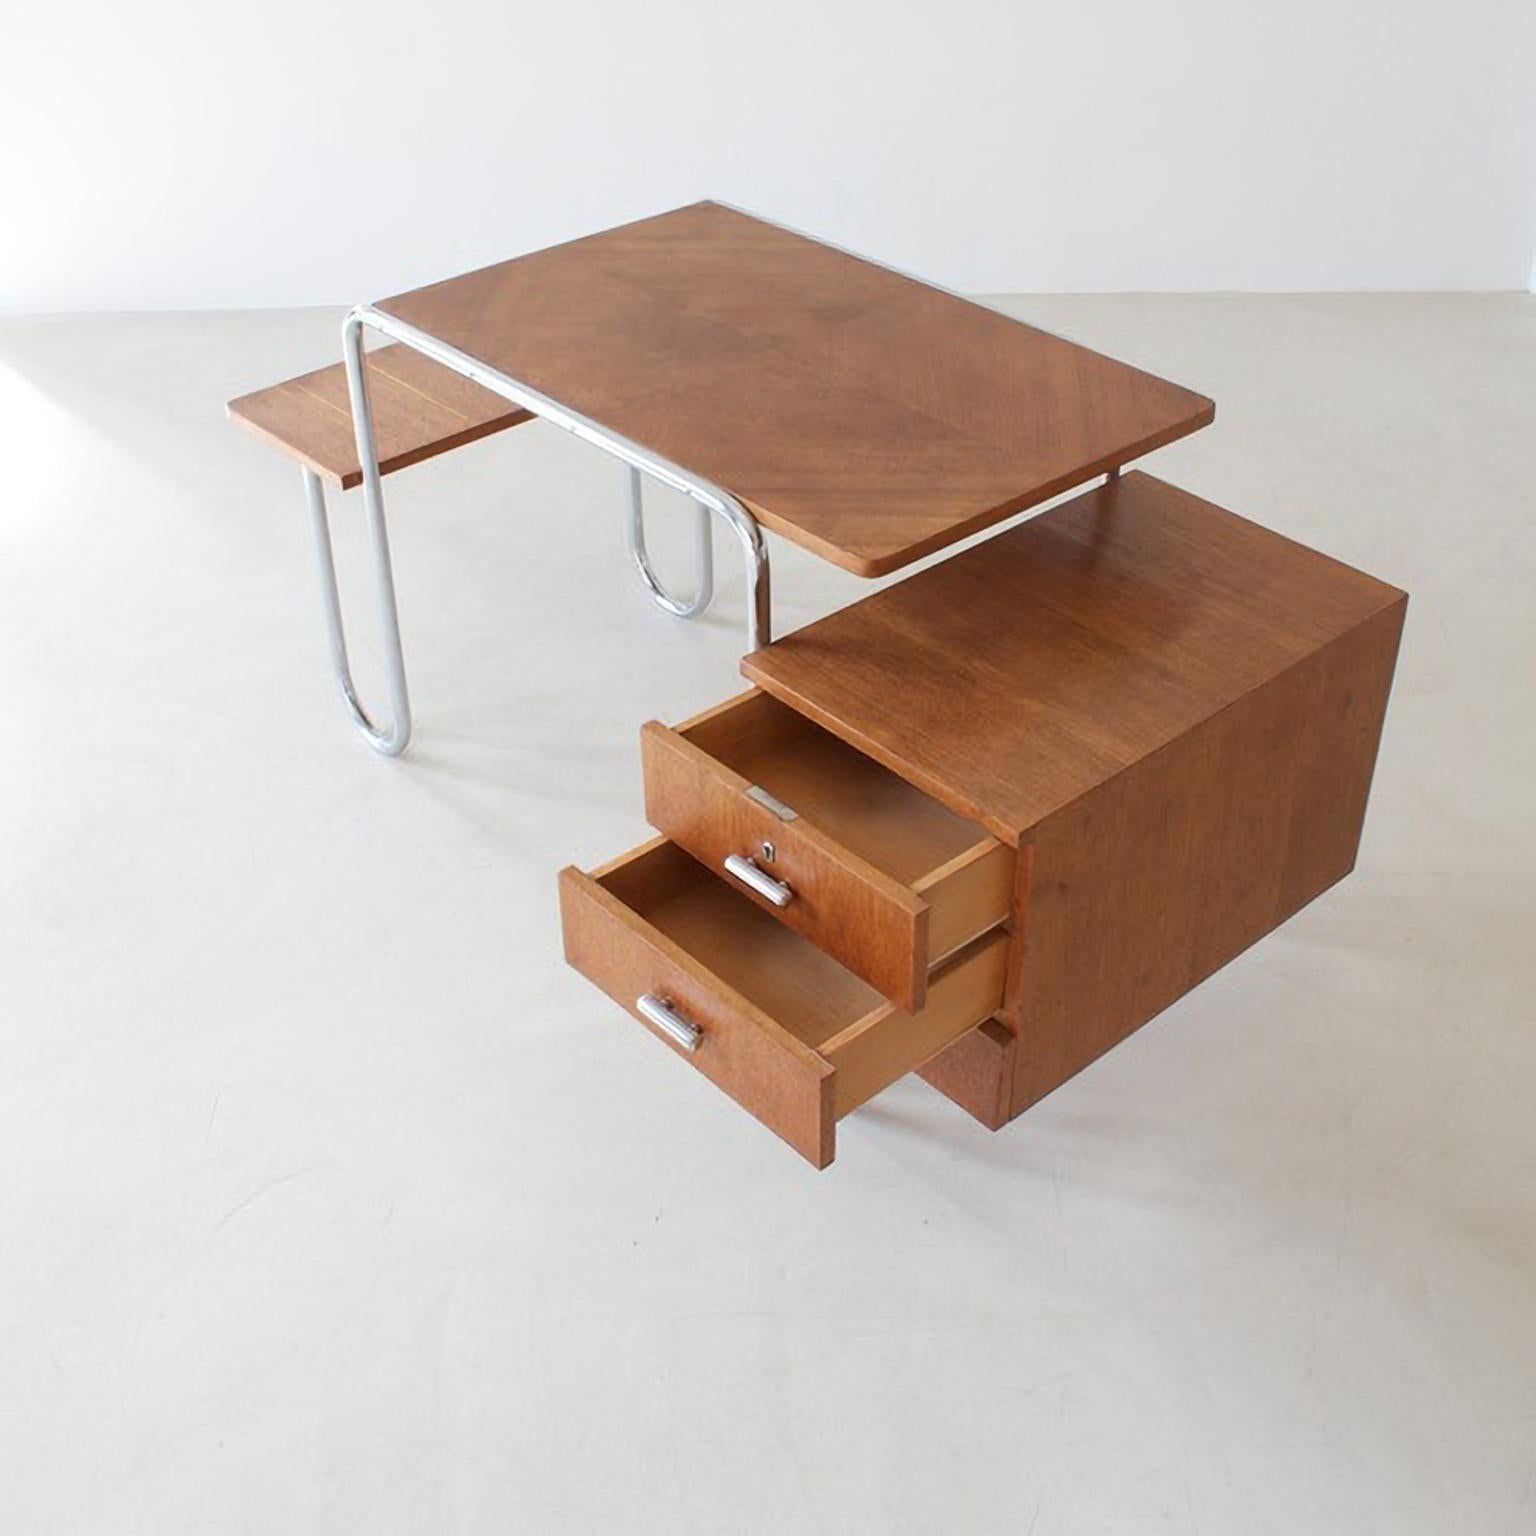 Bauhaus Tubular Steel Desk by André Lurçat, Manufactured by Thonet, circa. 1935 In Good Condition For Sale In Berlin, DE